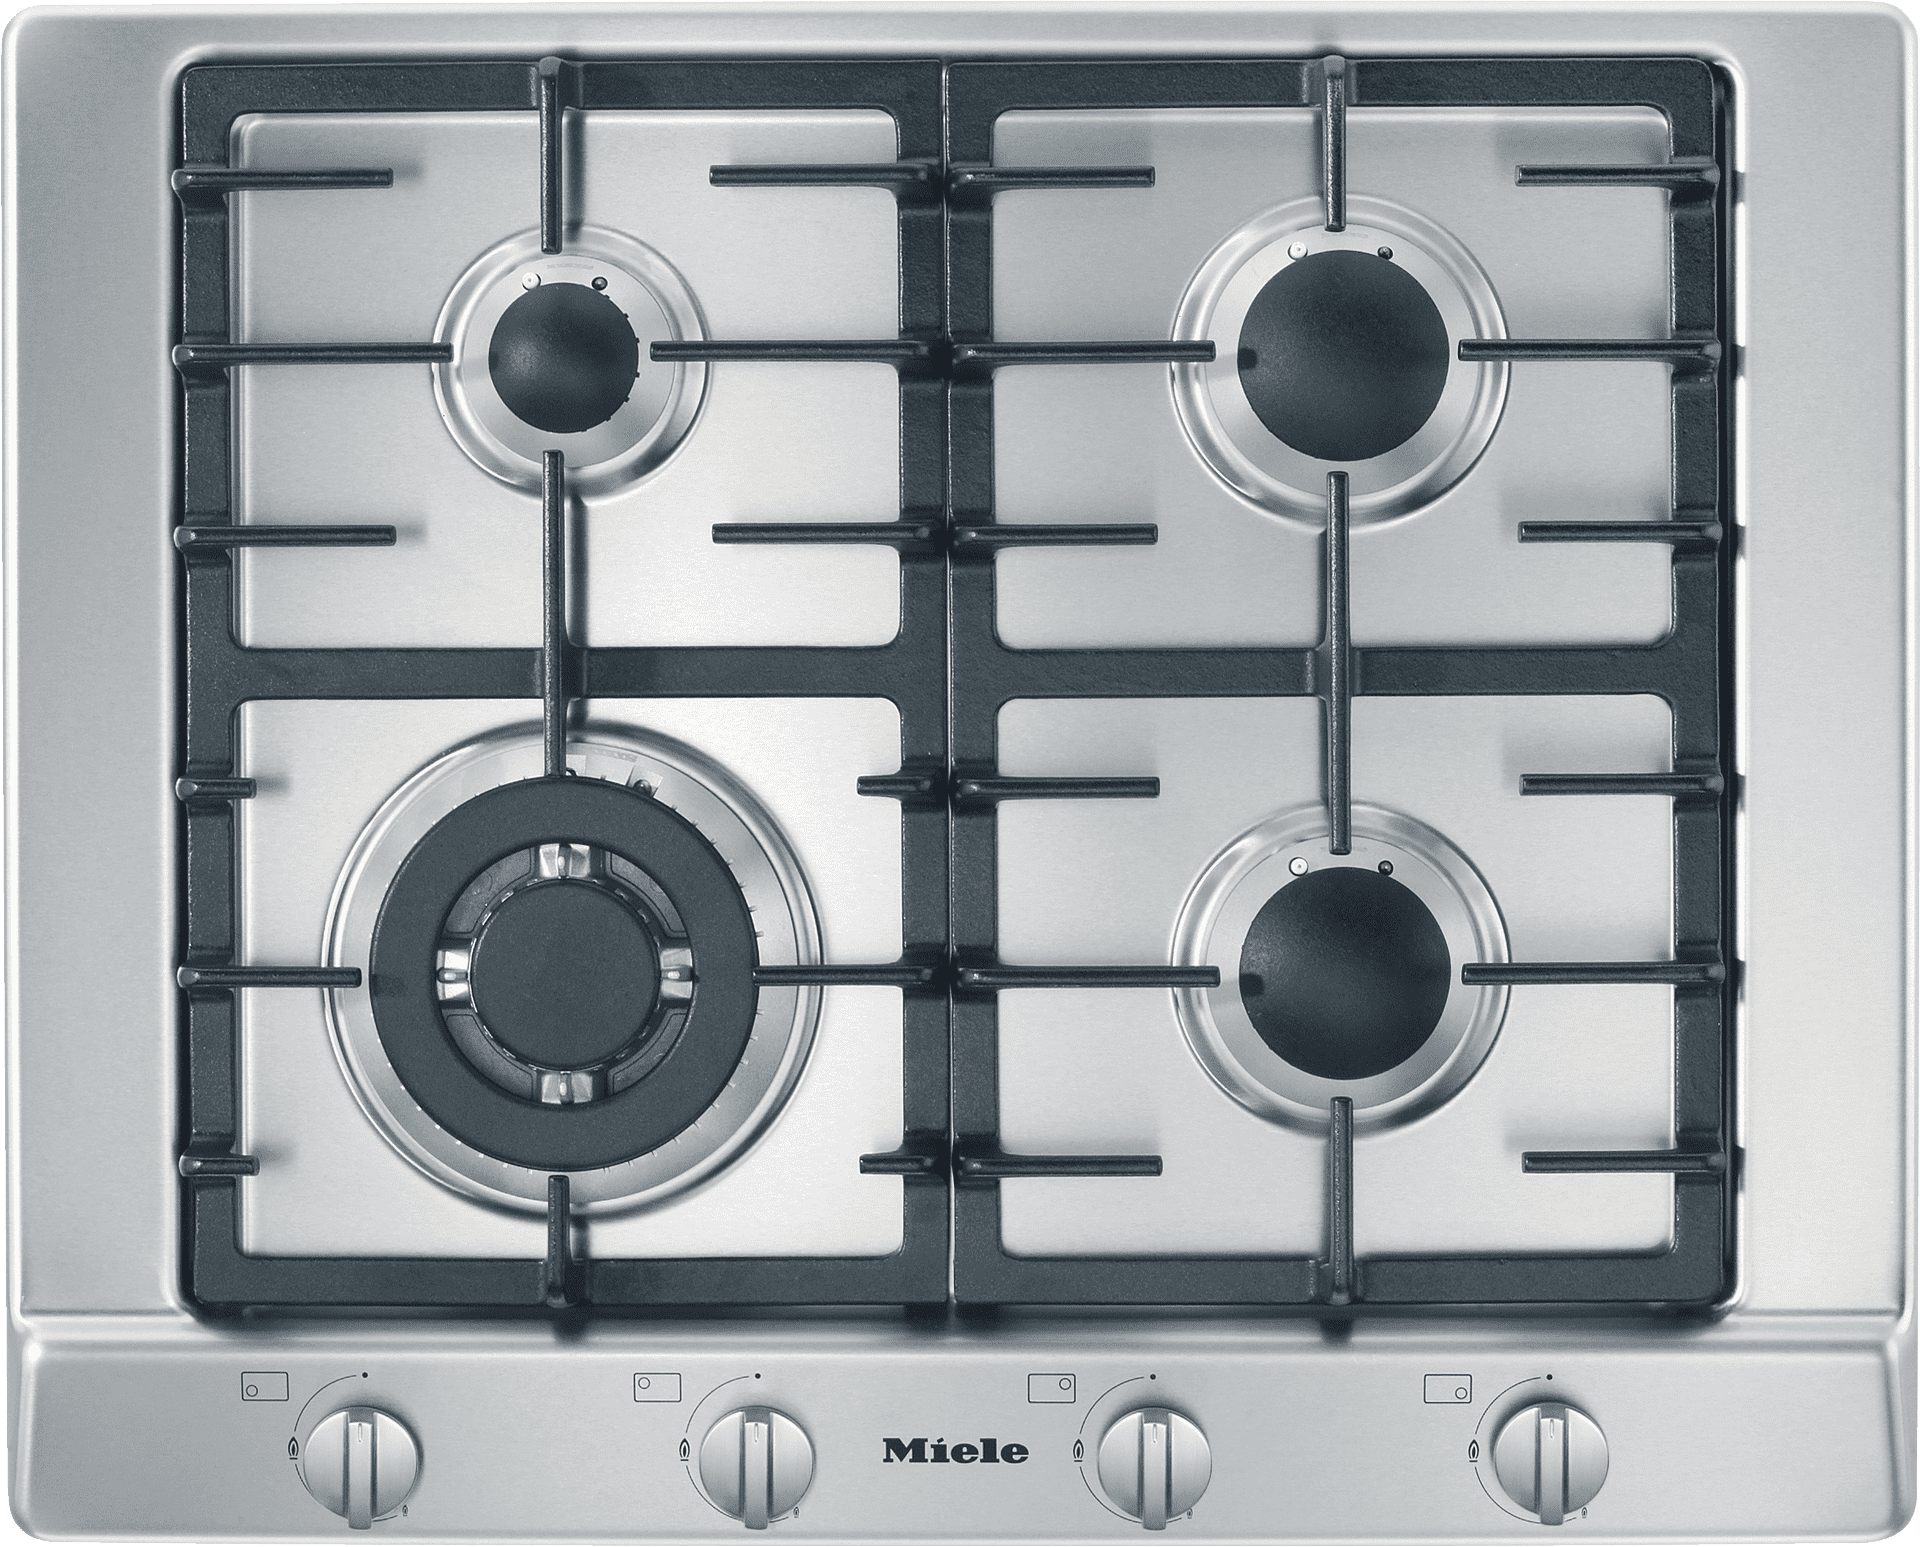 Miele KM2012G Km 2012 G - Gas Cooktop With A Mono Wok Burner For Special Applications.